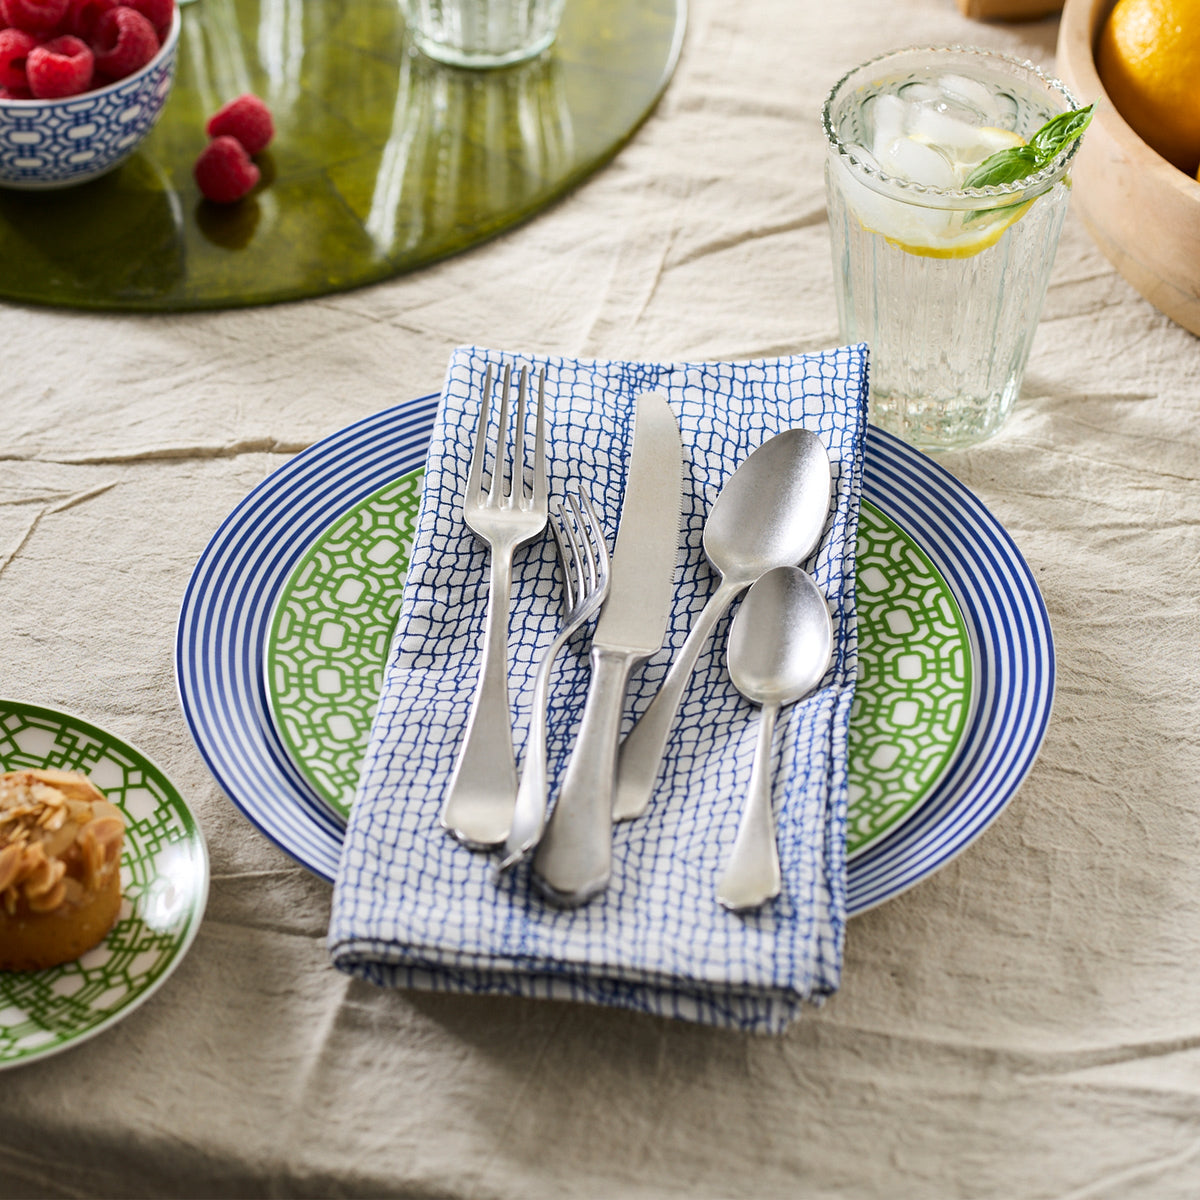 A Mepra Baroque Collection plate featuring the Mepra Baroque 5-Piece Flatware Setting, with a stunning blue and white design.